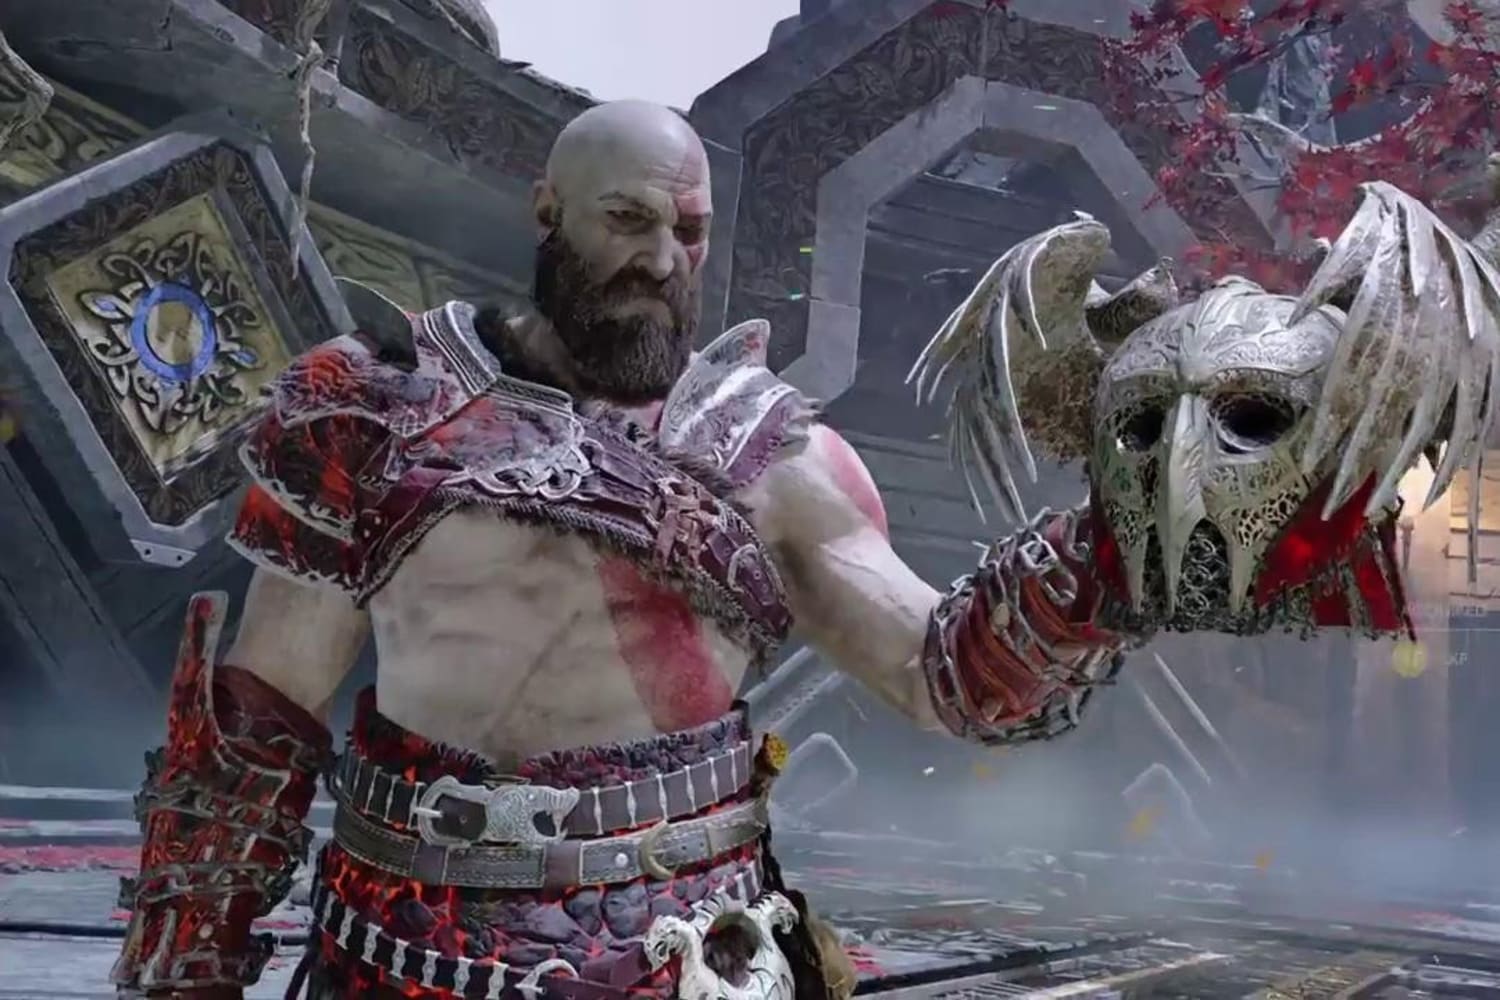 the new god of war ps4